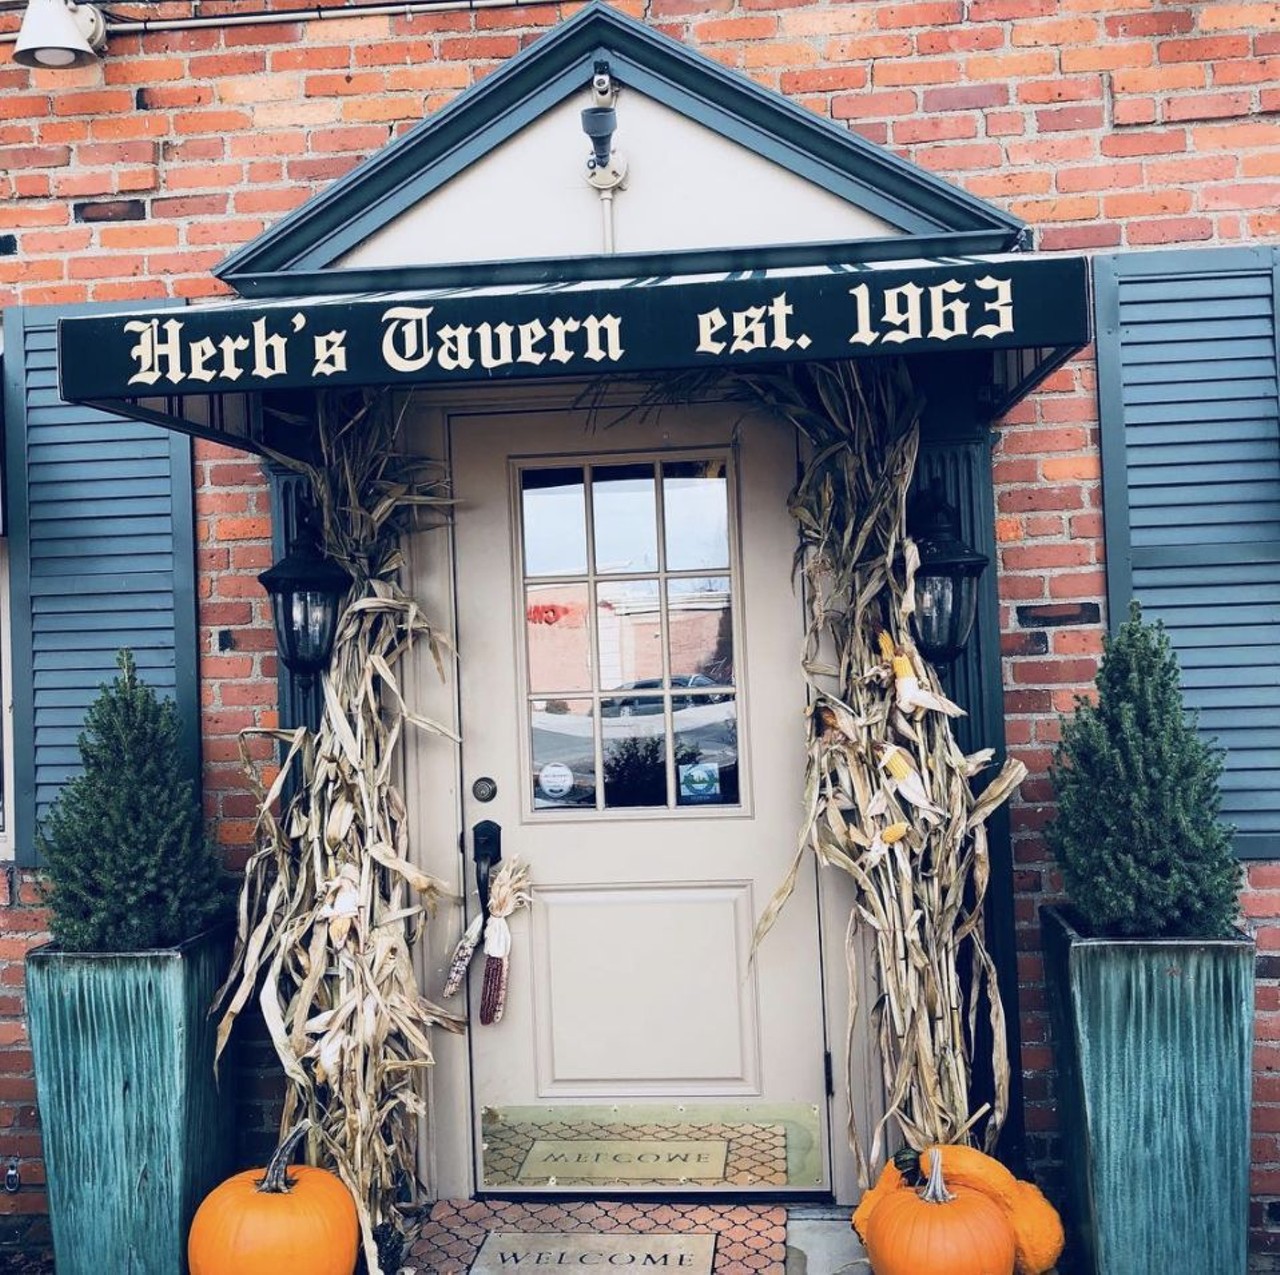  Herb&#146;s Tavern
19925 Detroit Ave., Rocky River
Herb and Bobbie Brugh started this Rocky River tavern in 1963 and owned and operated it for 50 years. In 2014, their daughter Kim Berry took over and has been running it ever since.
Photo via @Herbs_Tavern/Instagram